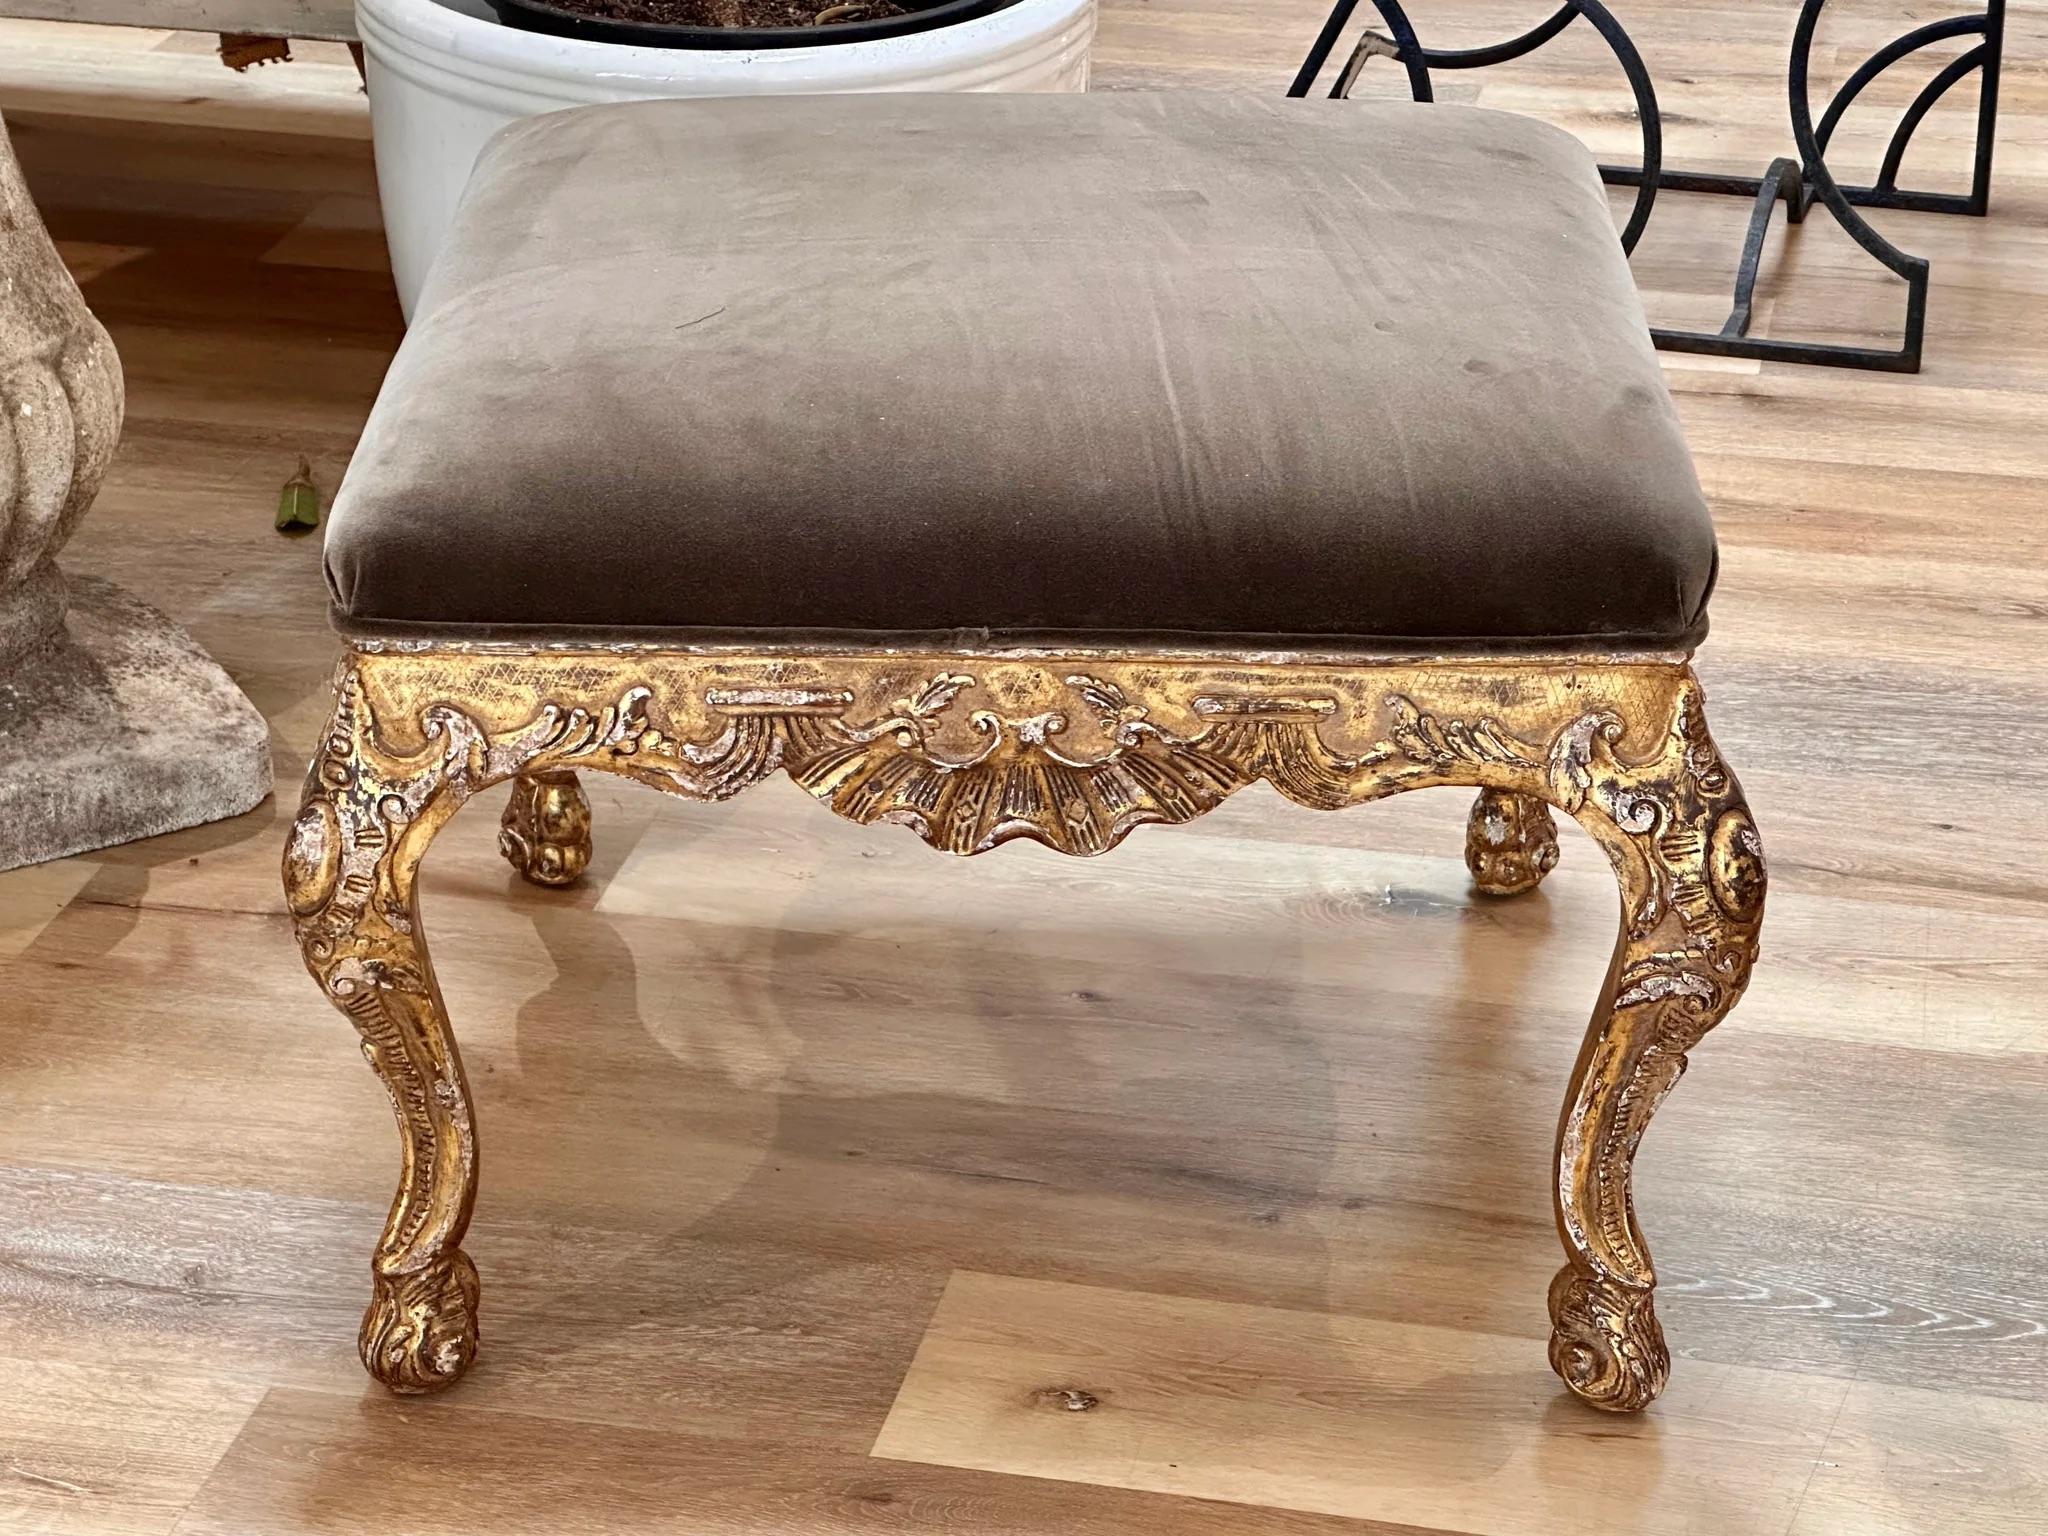 A Louis XV Style Giltwood Tabouret, likely 19th Century, possibly earlier,  with velvet upholstered seat.  Height 20 x 26 3/4 inches square.  
